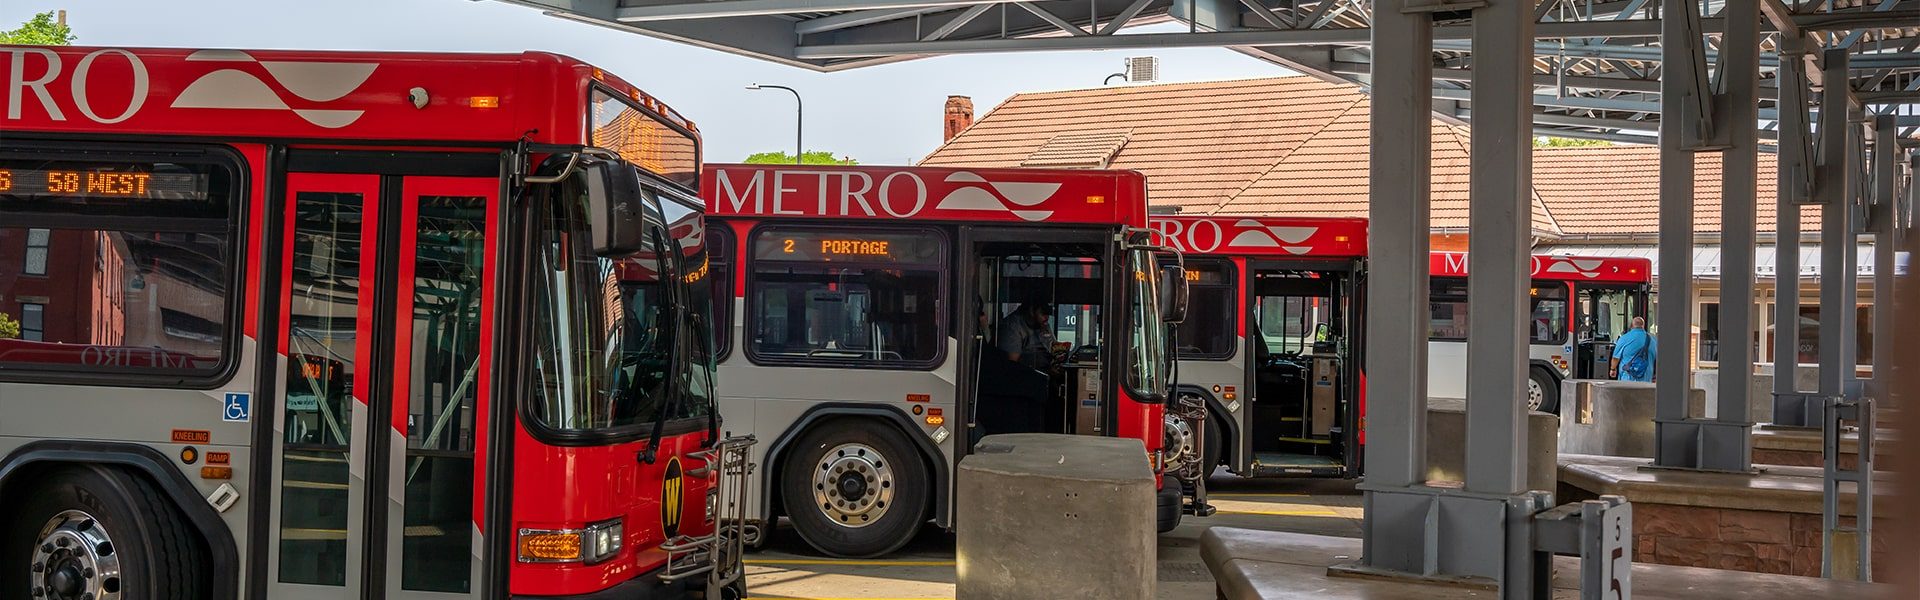 An image of buses parked at the Kalamazoo Transportation Center.